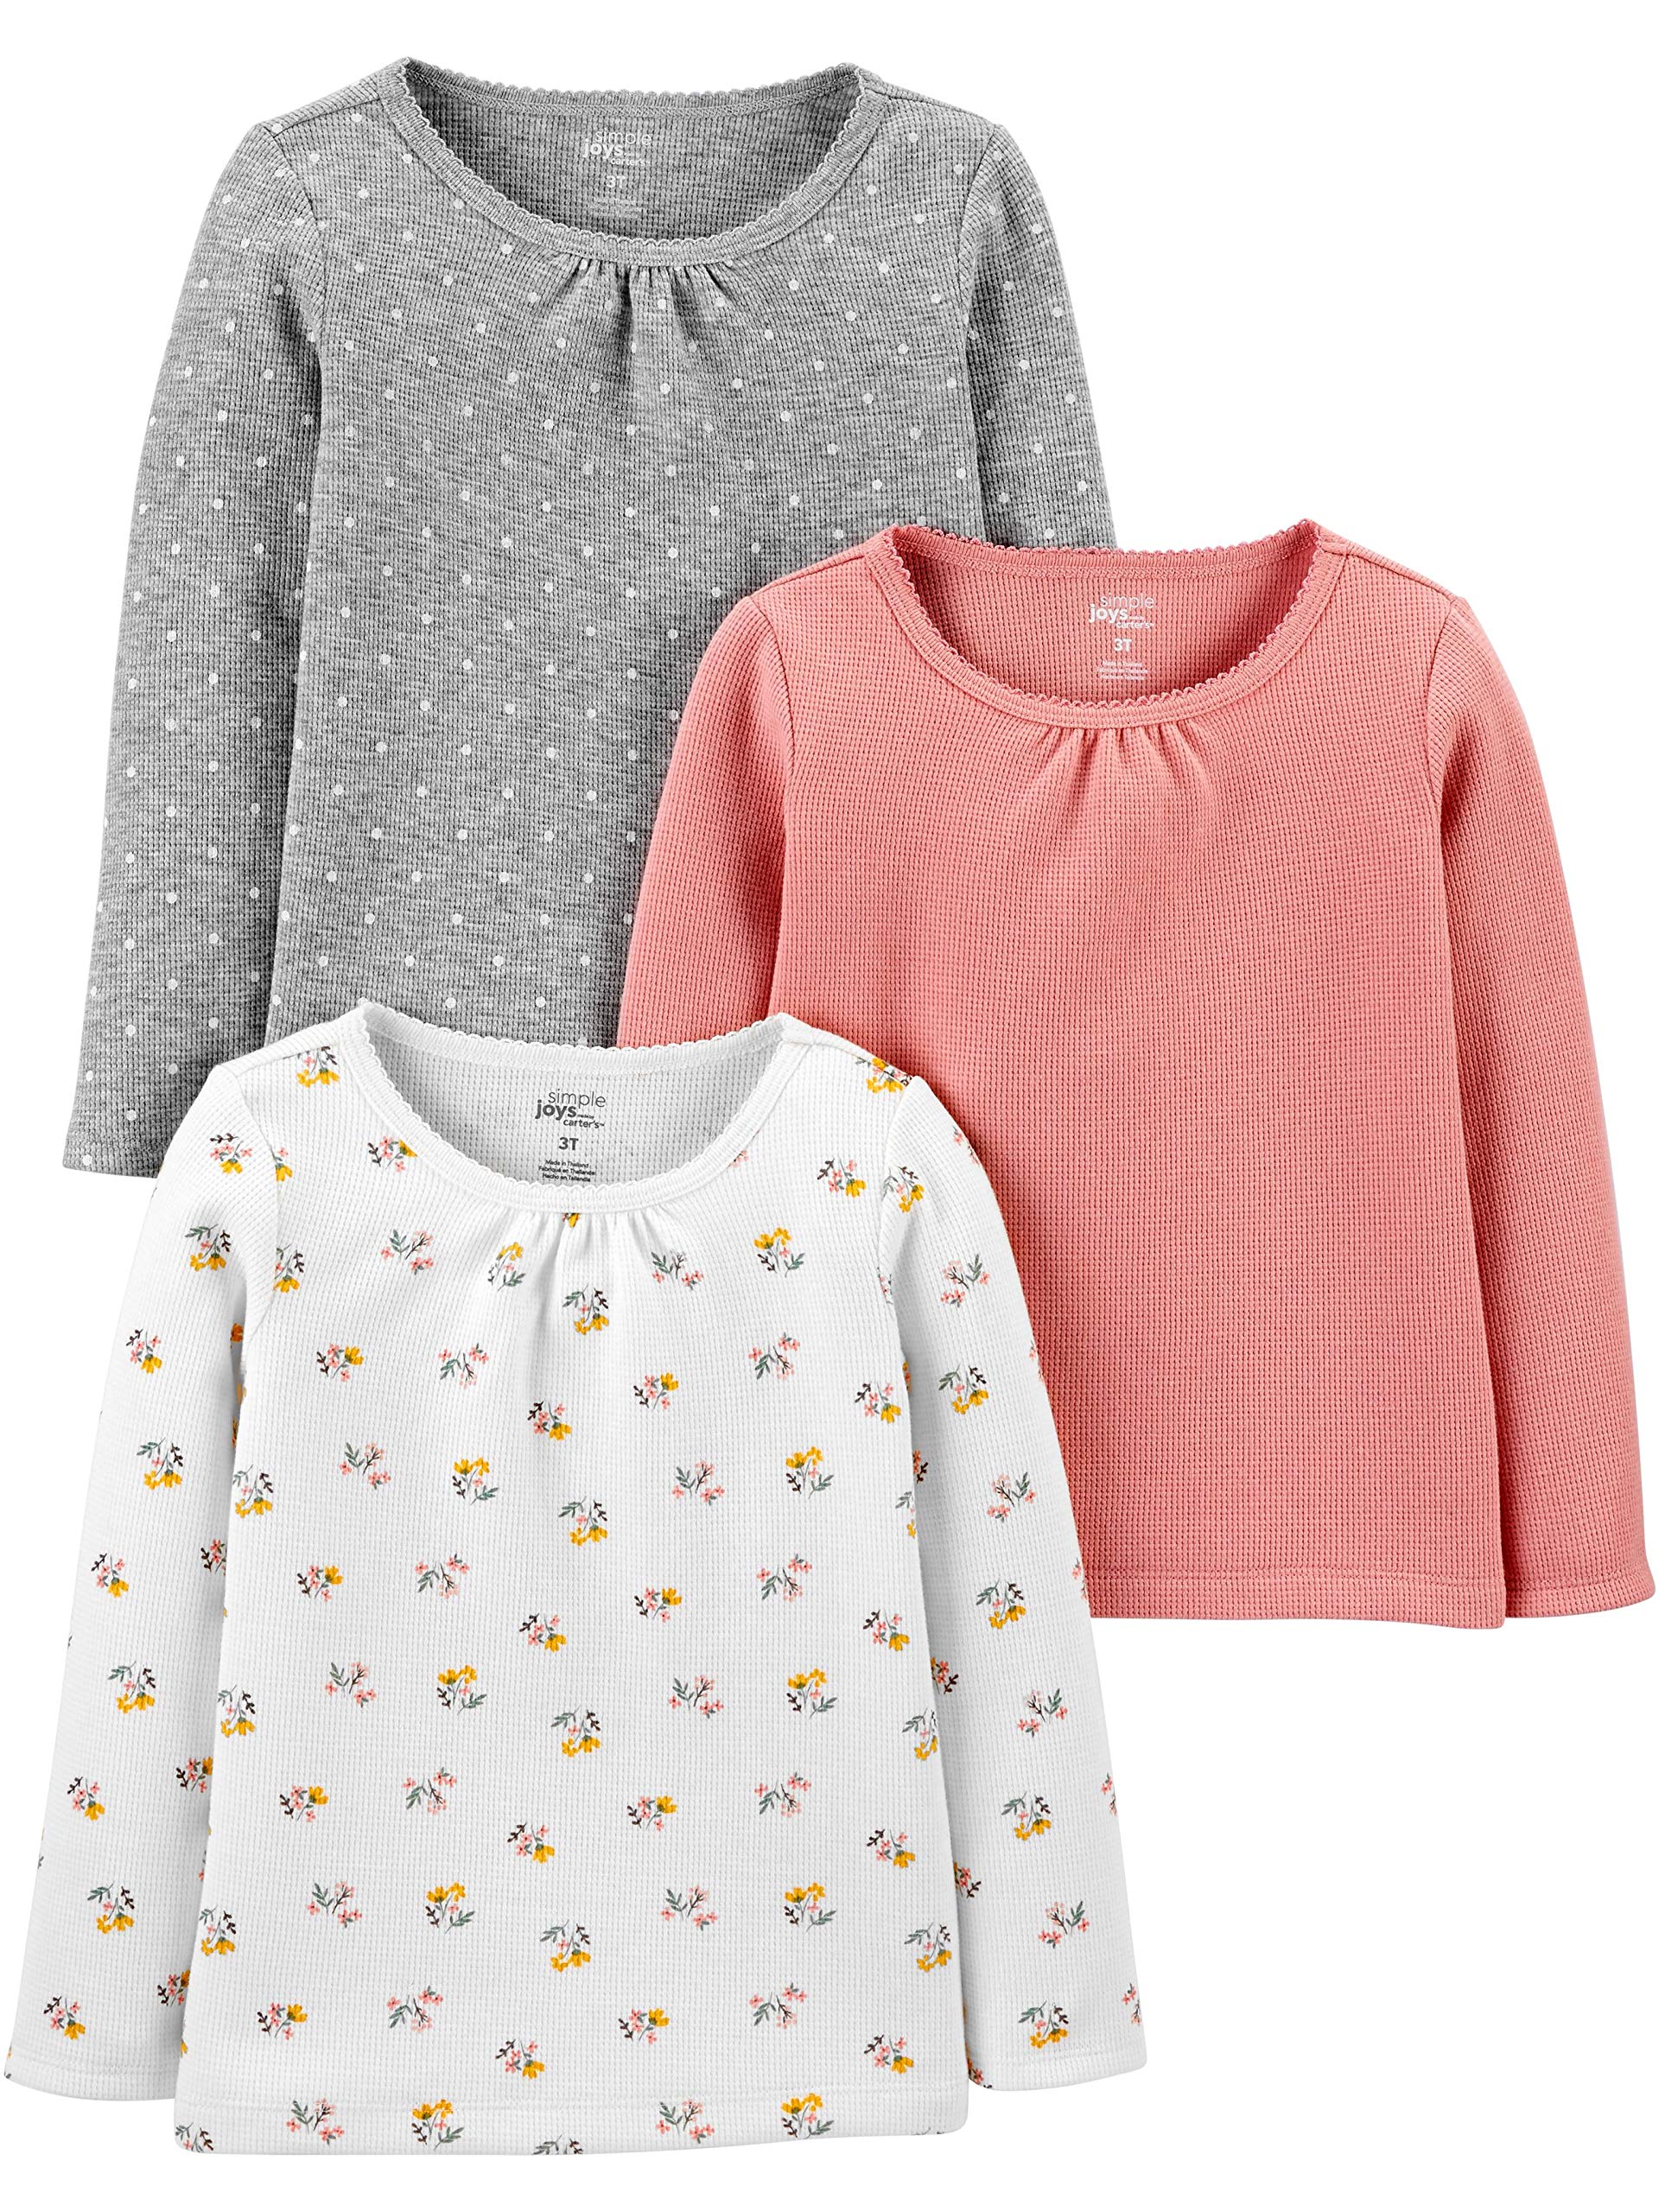 Simple Joys by Carter's Baby Girls' Long-Sleeve Tops, Pack of 3, Grey Dots/Peach/White Floral, 18 Months